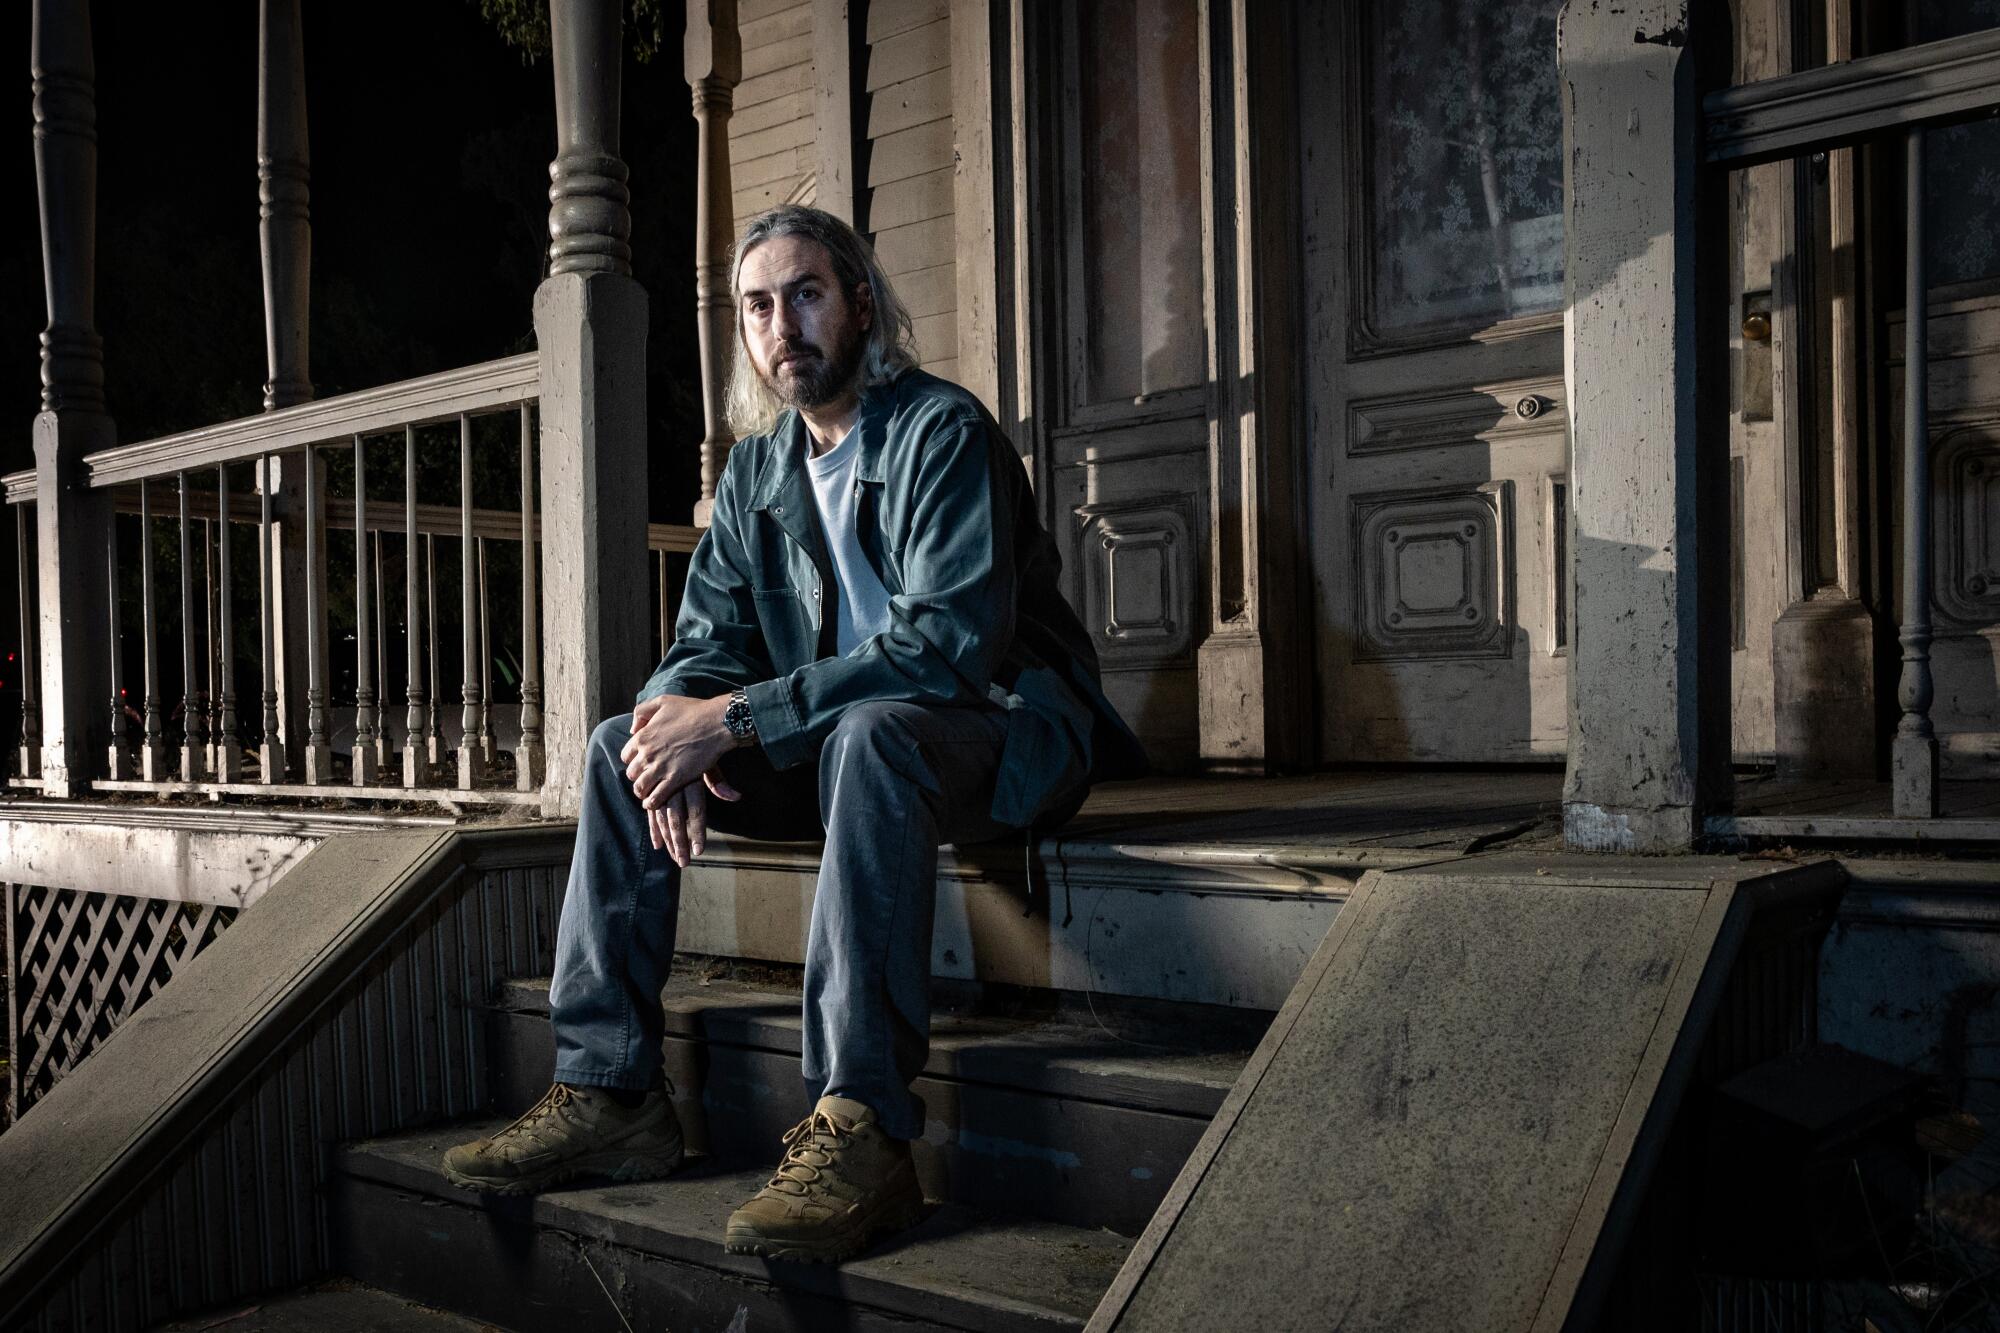 Unafraid, a man sits on the front steps of an iconic movie murder house.